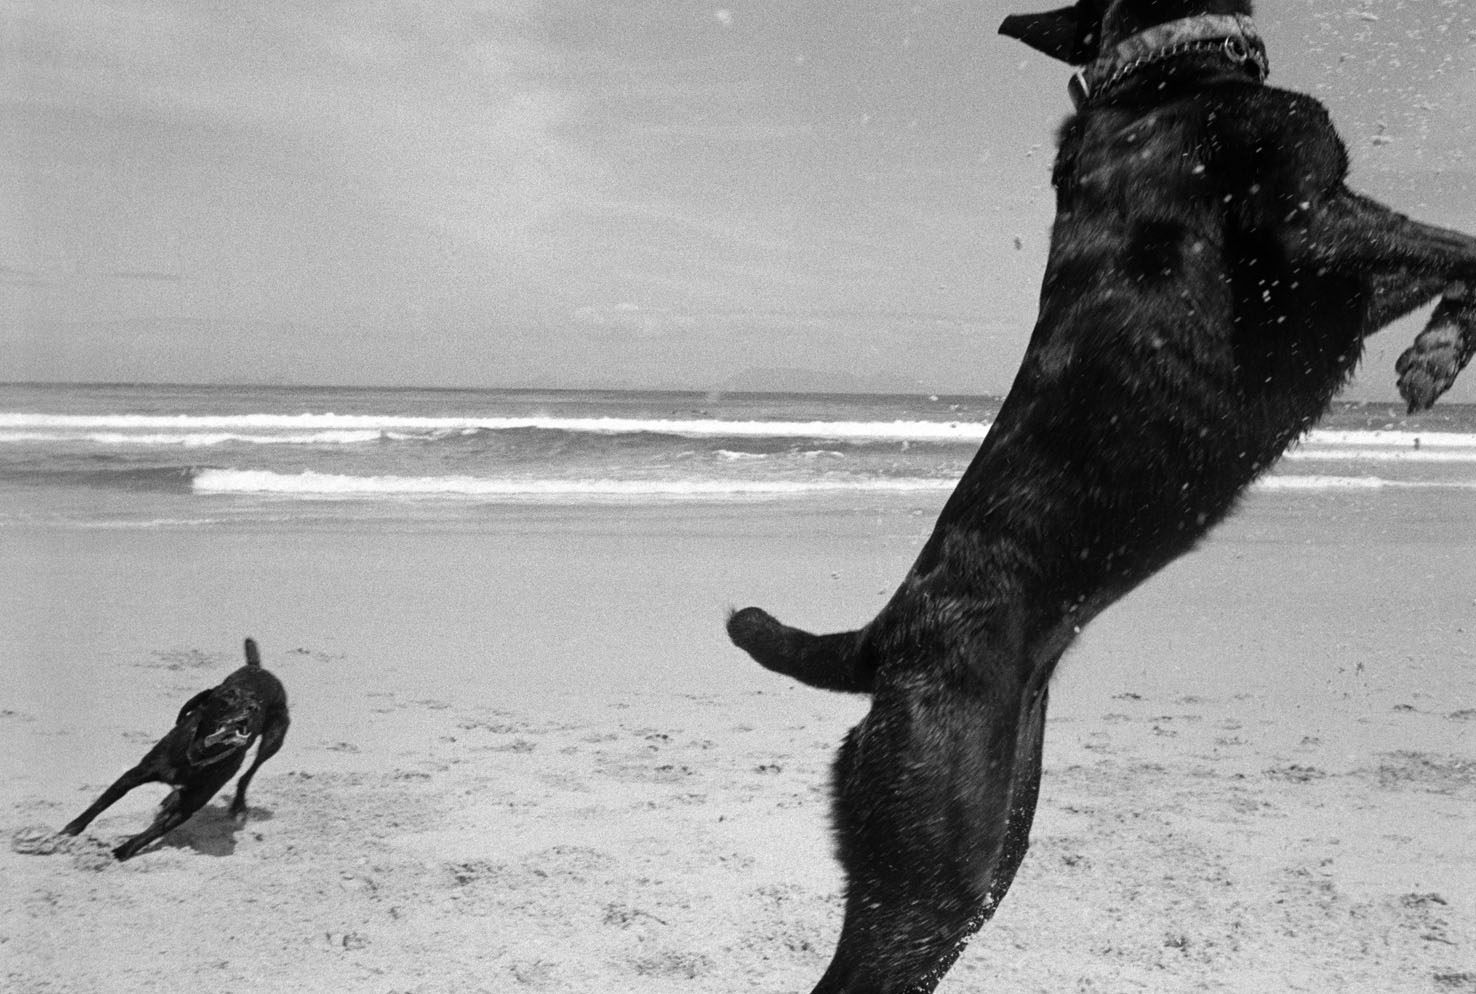  Two Dogs, Pringle Bay, Cape, South Africa. 1999/2000 